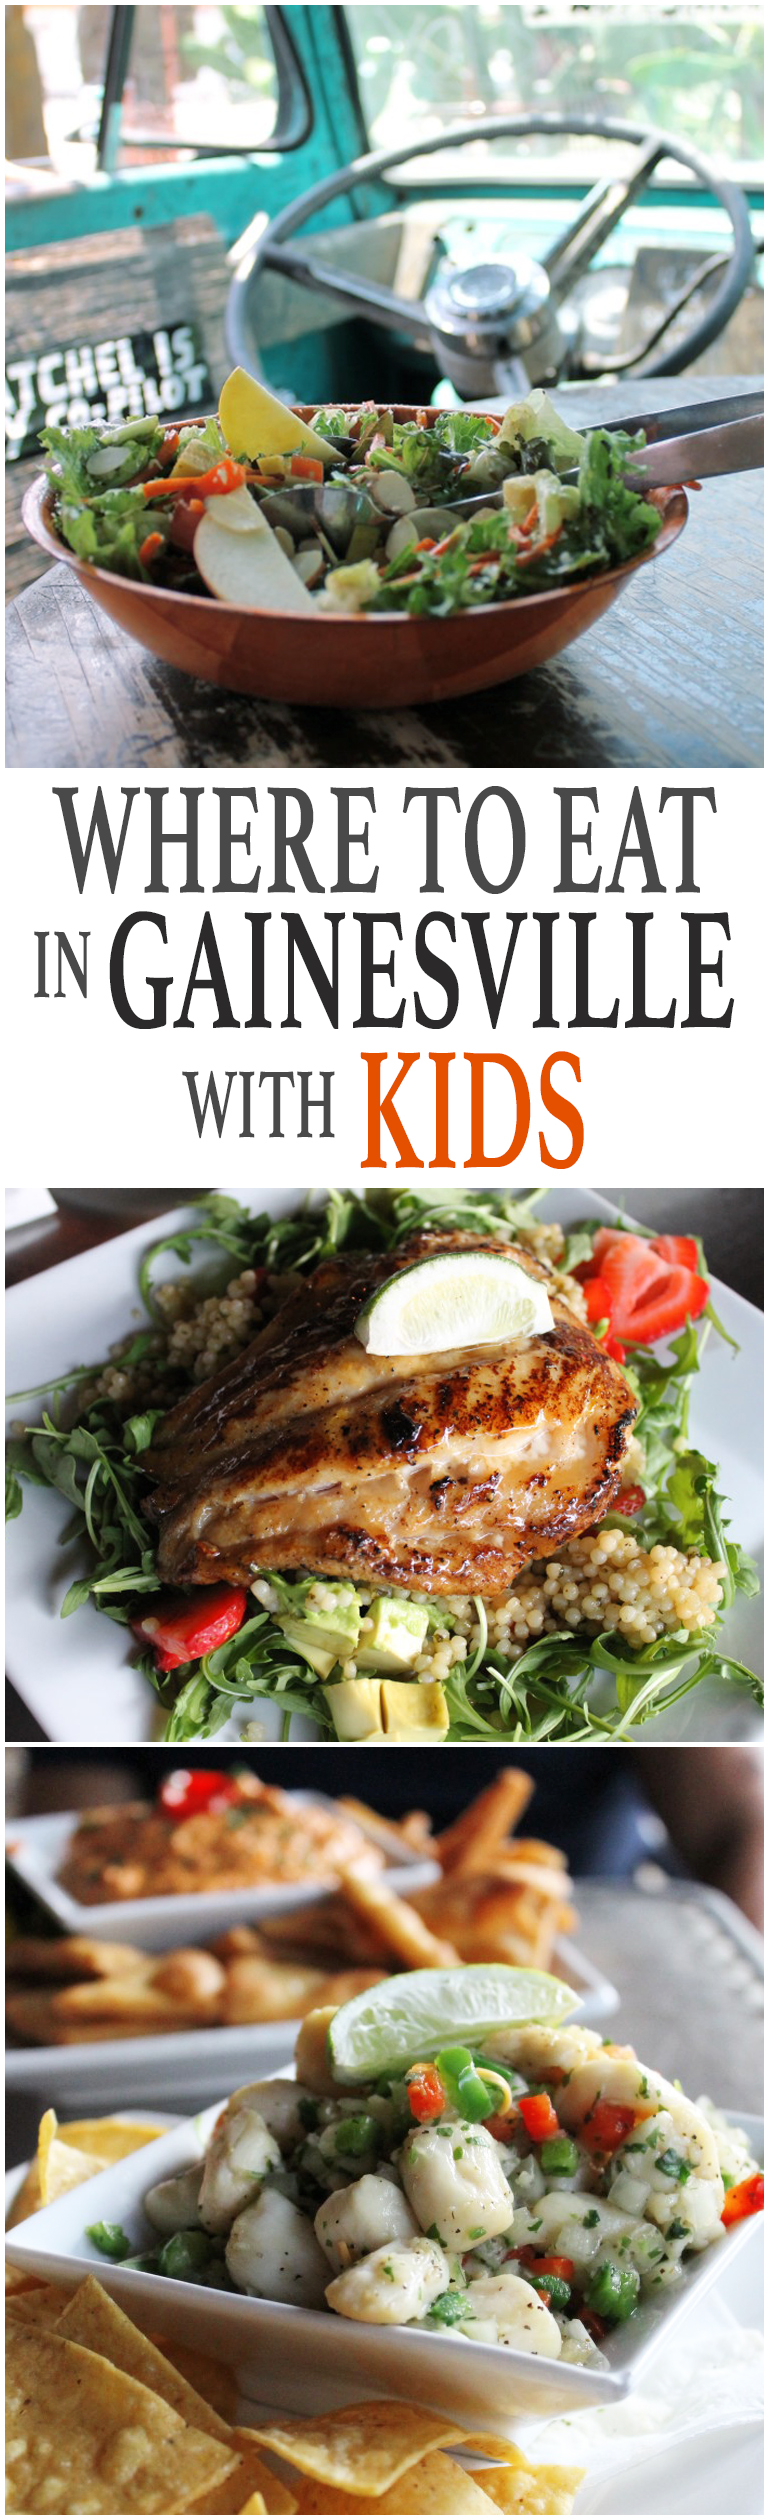 Where to eat in Gainesville with kids